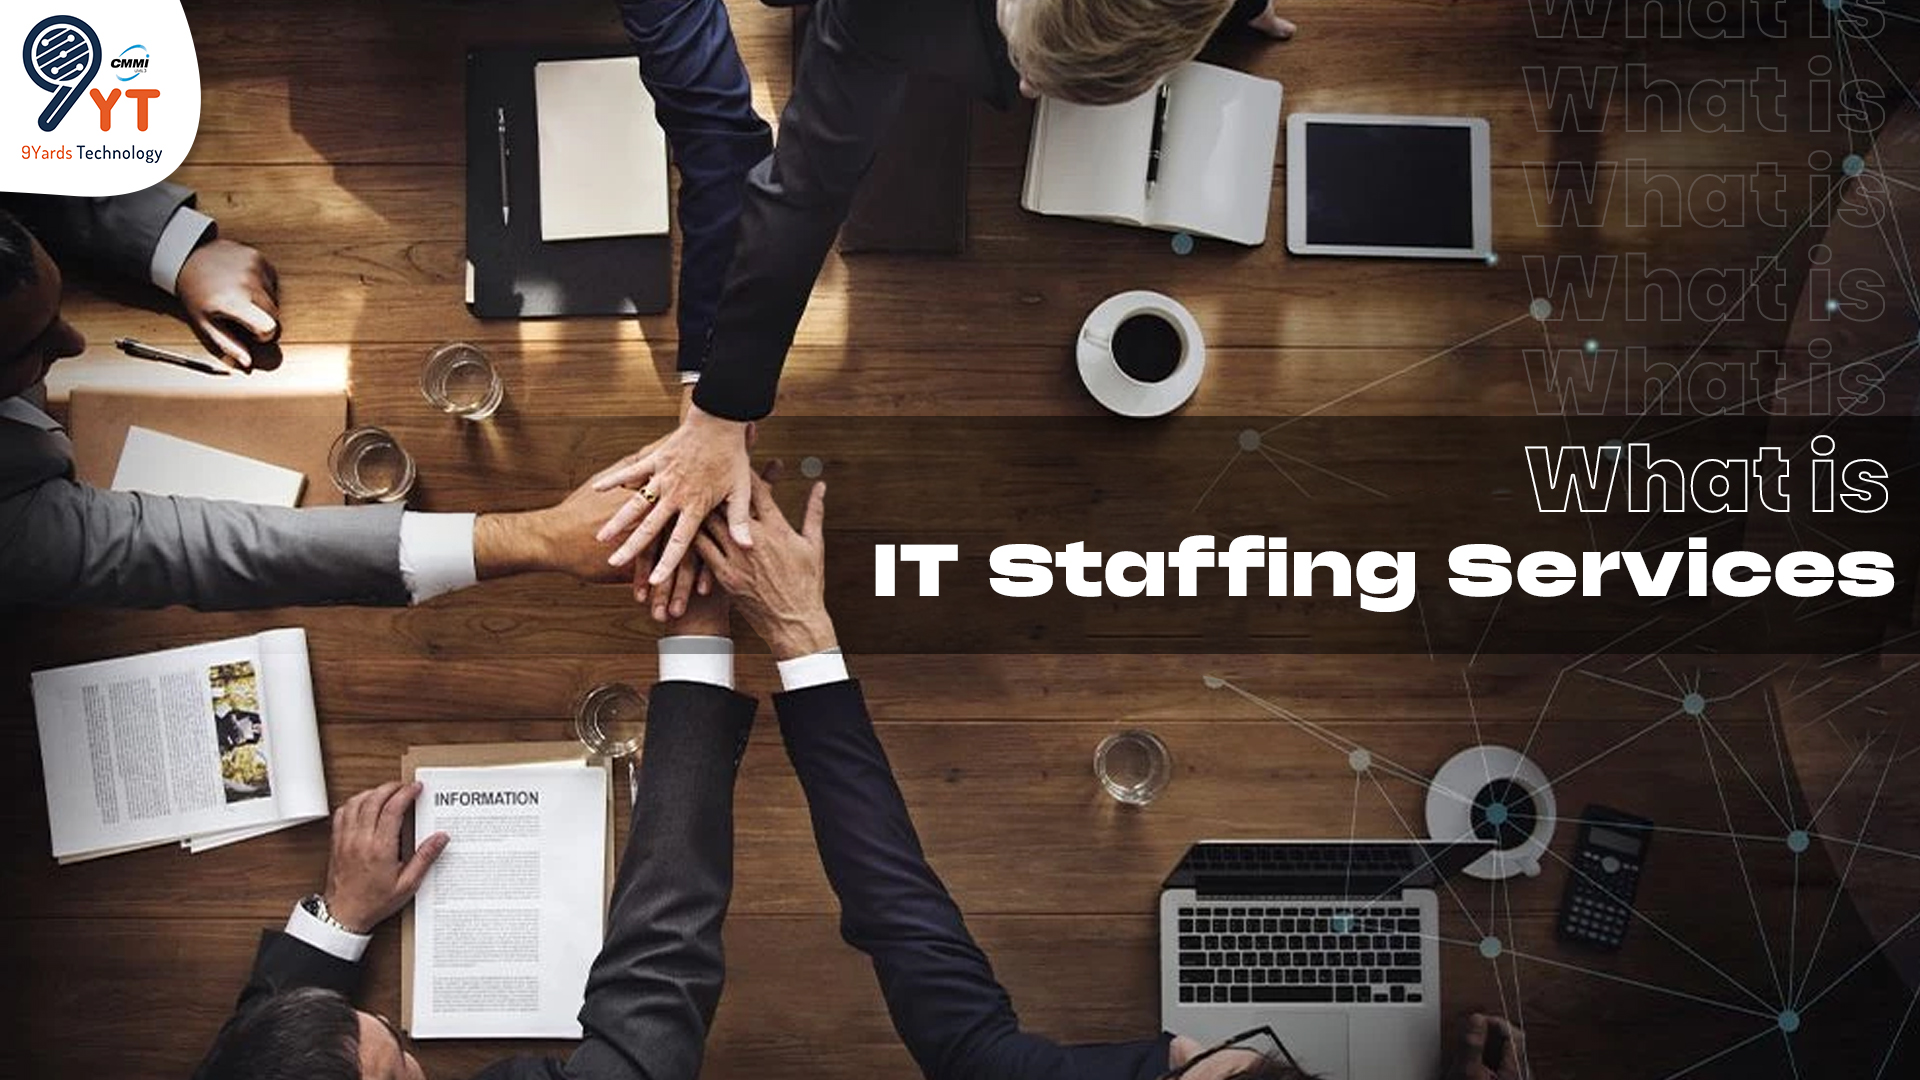 What is IT Staffing Services